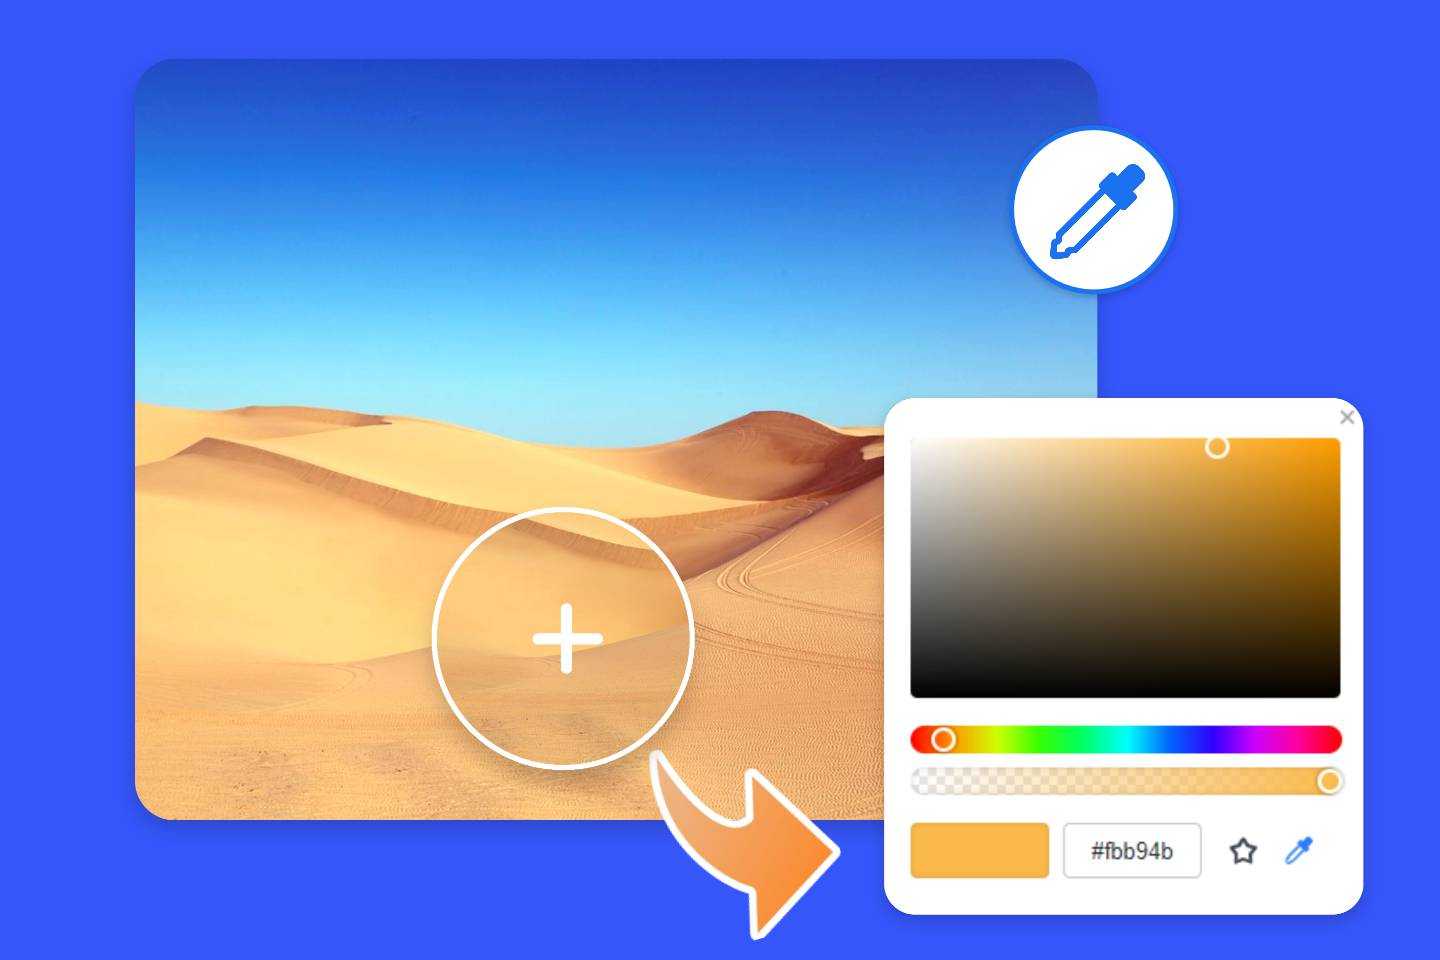 Color Picker From Image: Pick Color From Image Easily